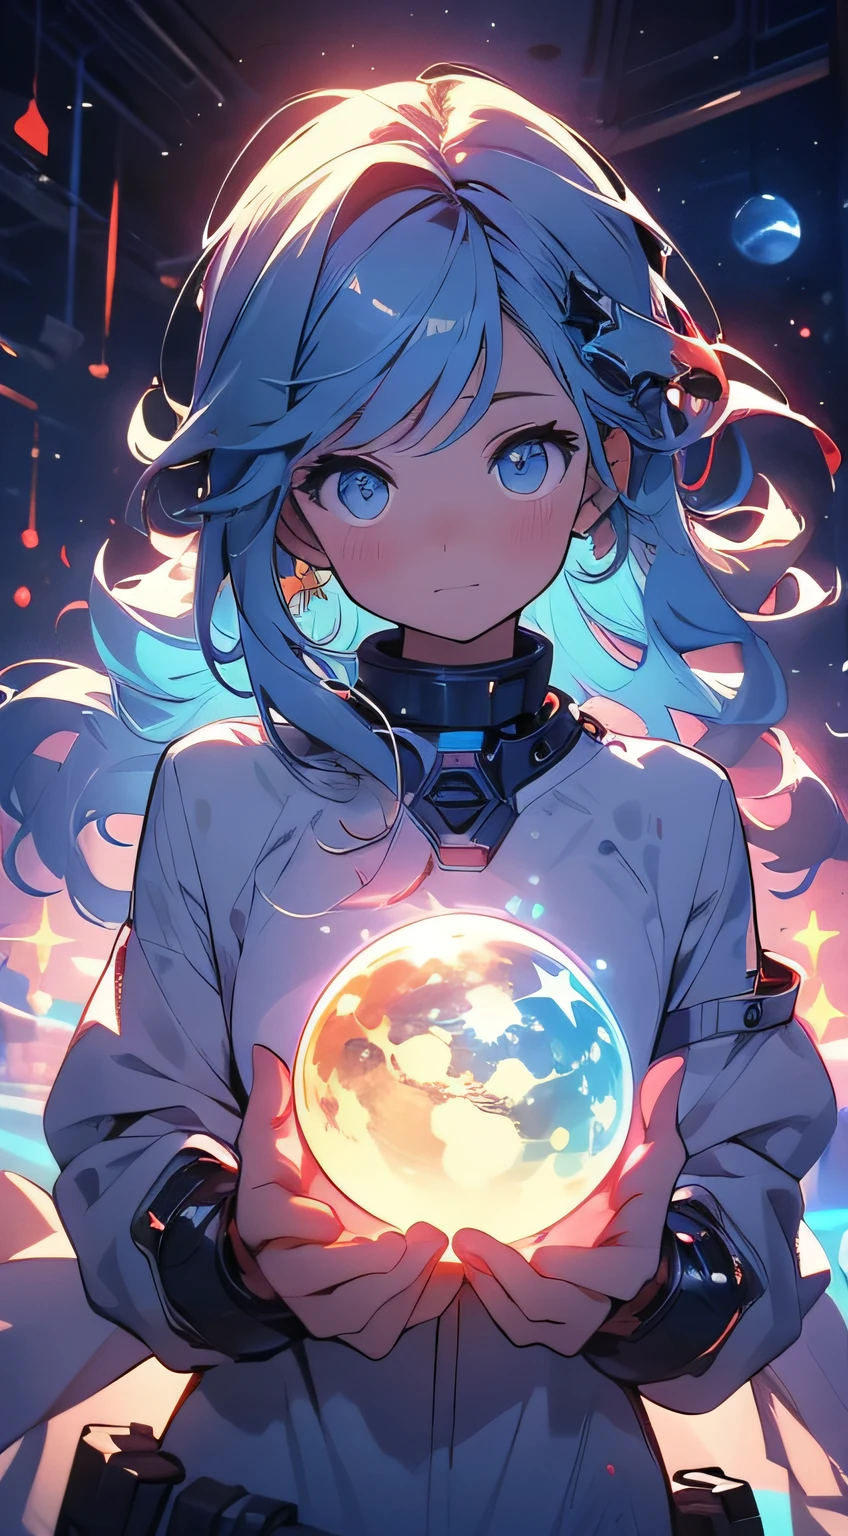 (masterpiece), best quality, a cute girl floating in the space holding a planet, ((holding)), sphere, ((glow, planet glow)), perfect face, expressive eyes, space suit, austronaut helmet, spiral galaxy, astronomy wallpaper, happy, colorful, exciting, gorgeous, blue giant star, cowboy shot, cosmic, cosmos 4k, shiny, perfect light, glowing sphere BREAK is a cute girl on space, she is holding a glwoing sphere with the two hands, she is wearing a white space suit, she has blue hair, red eyes, red giant star, sun like star, shine, BREAK vivid colors, bright,shiny, cool colors, dramatic lighting, artistic, creative, digital art, wallpaper, (glowing eyes), magical, impossible, good vibes, good emotions, adventure, (solo, alone,1girl)